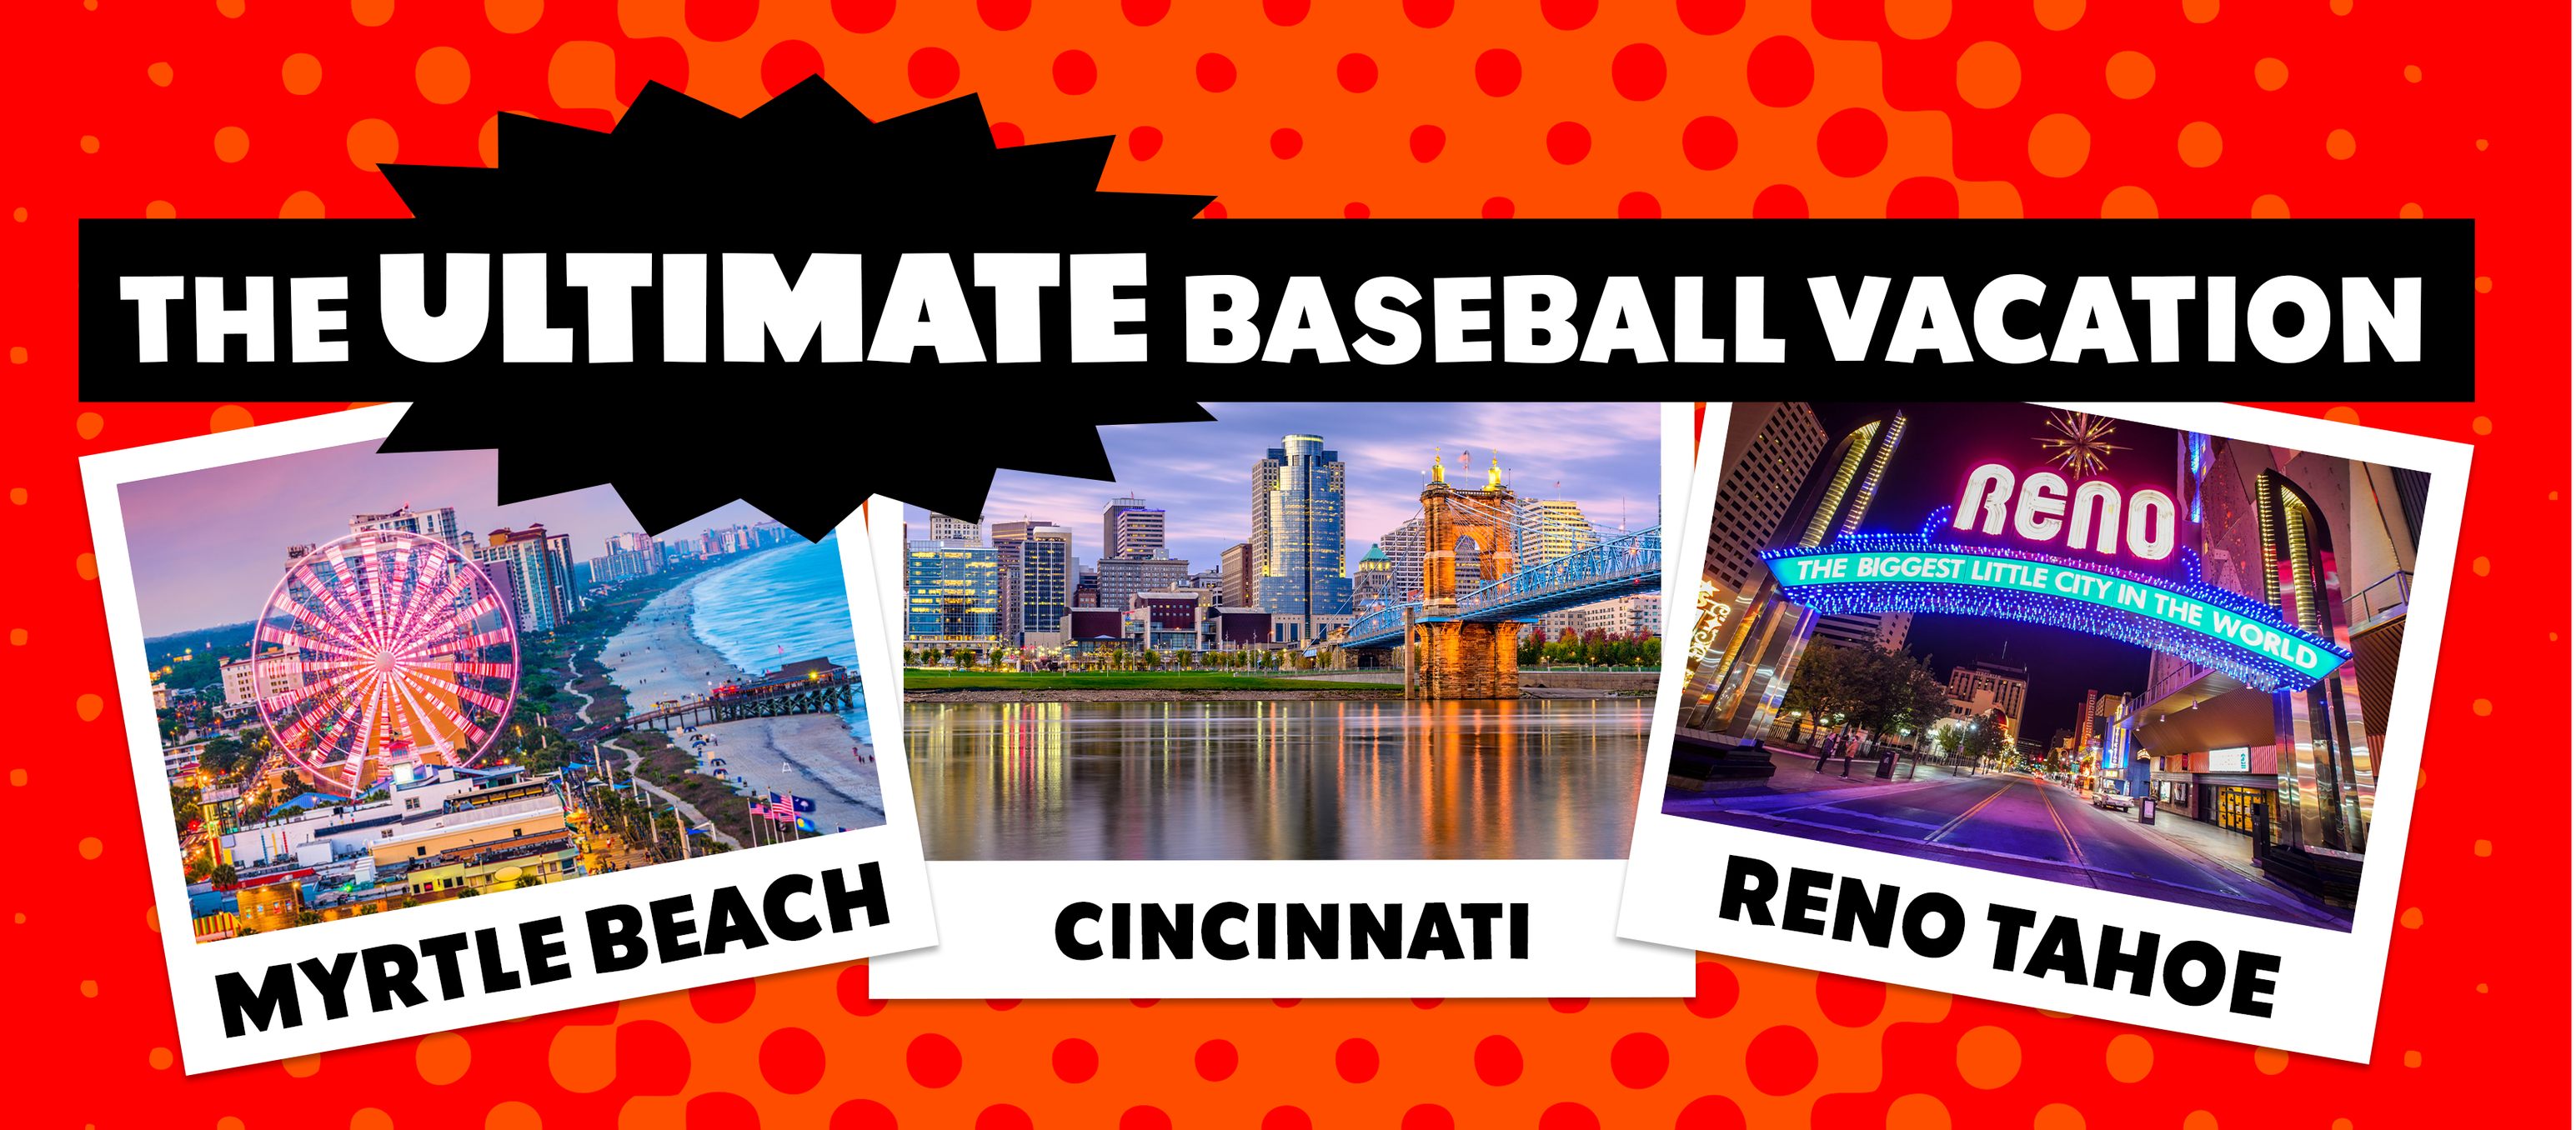 Experience the Ultimate Baseball Vacation this Summer! Playeasy Stories